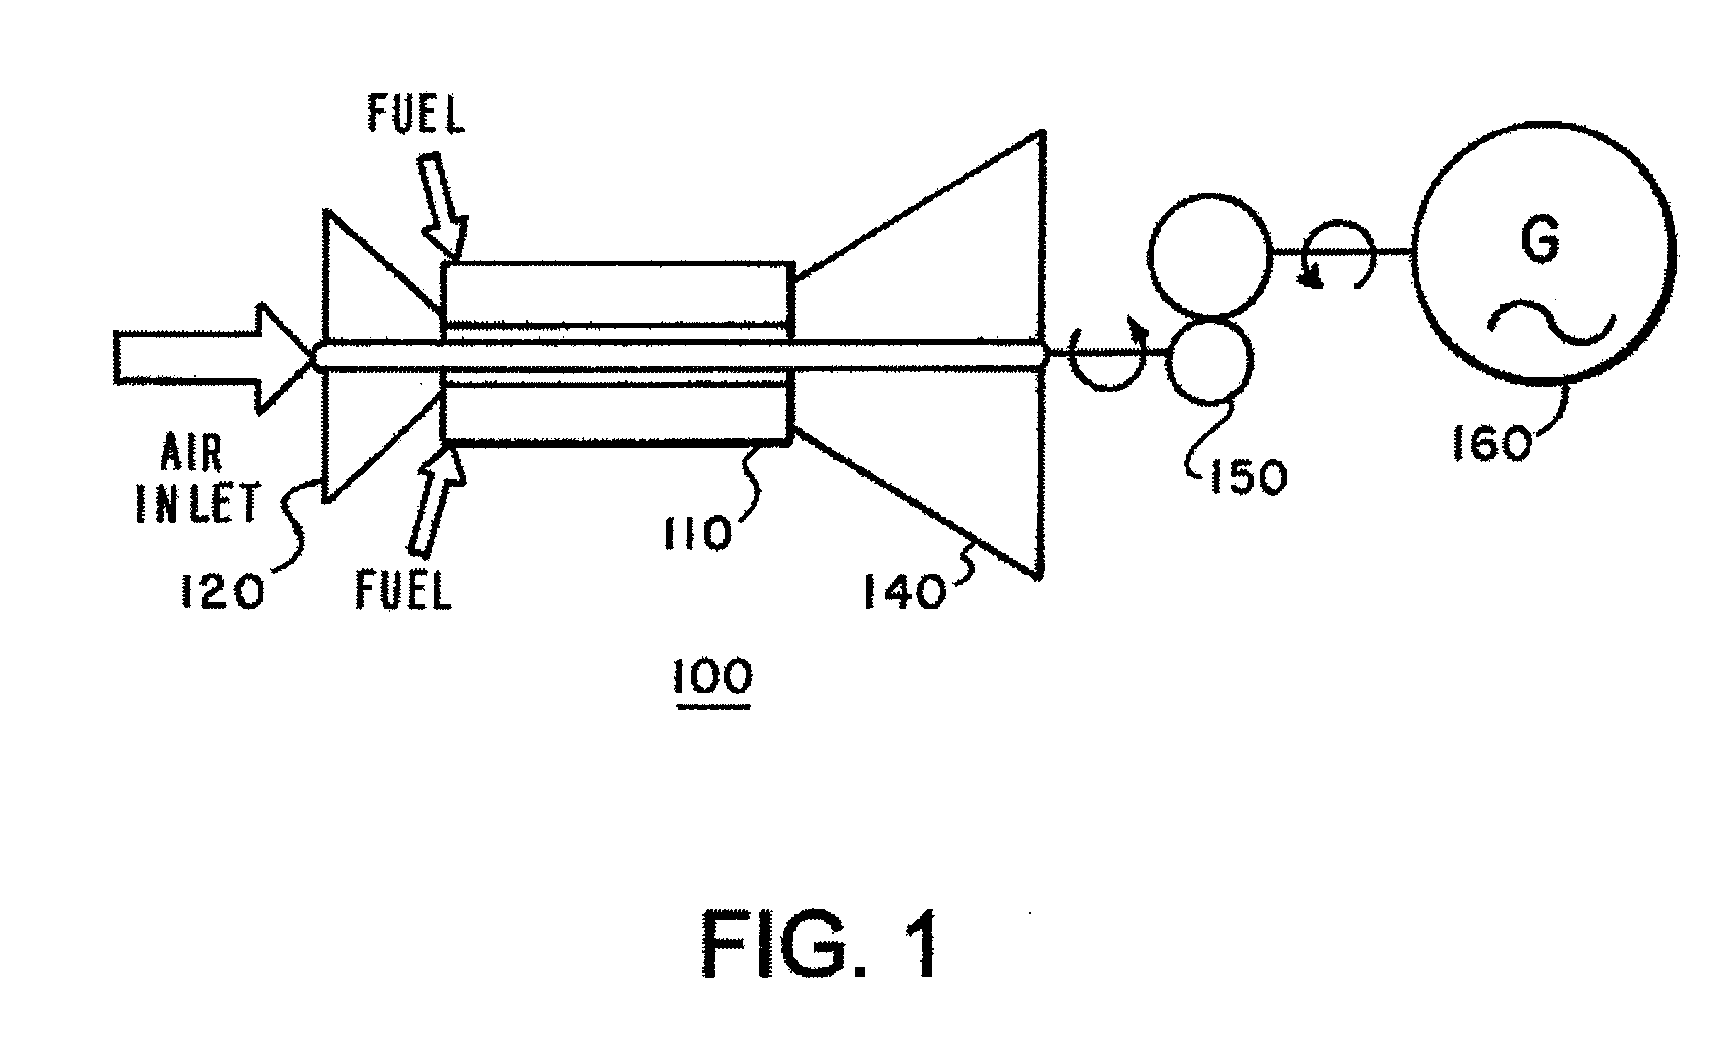 System and method for power production using a hybrid helical detonation device